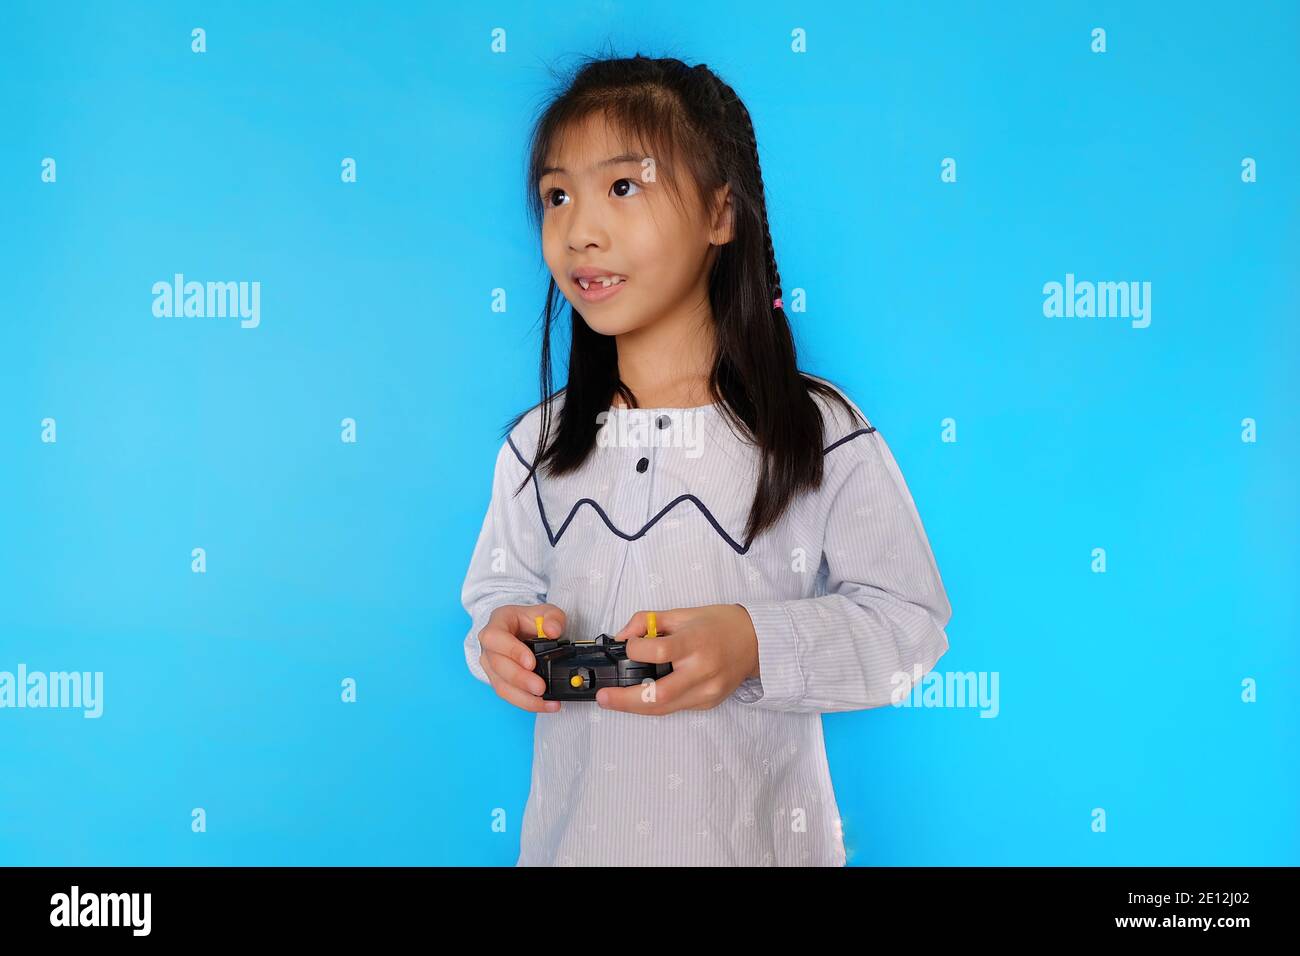 A cute Asian girl is playing with her drone, controlling it though her radio transmitter. Plain light blue background. Stock Photo